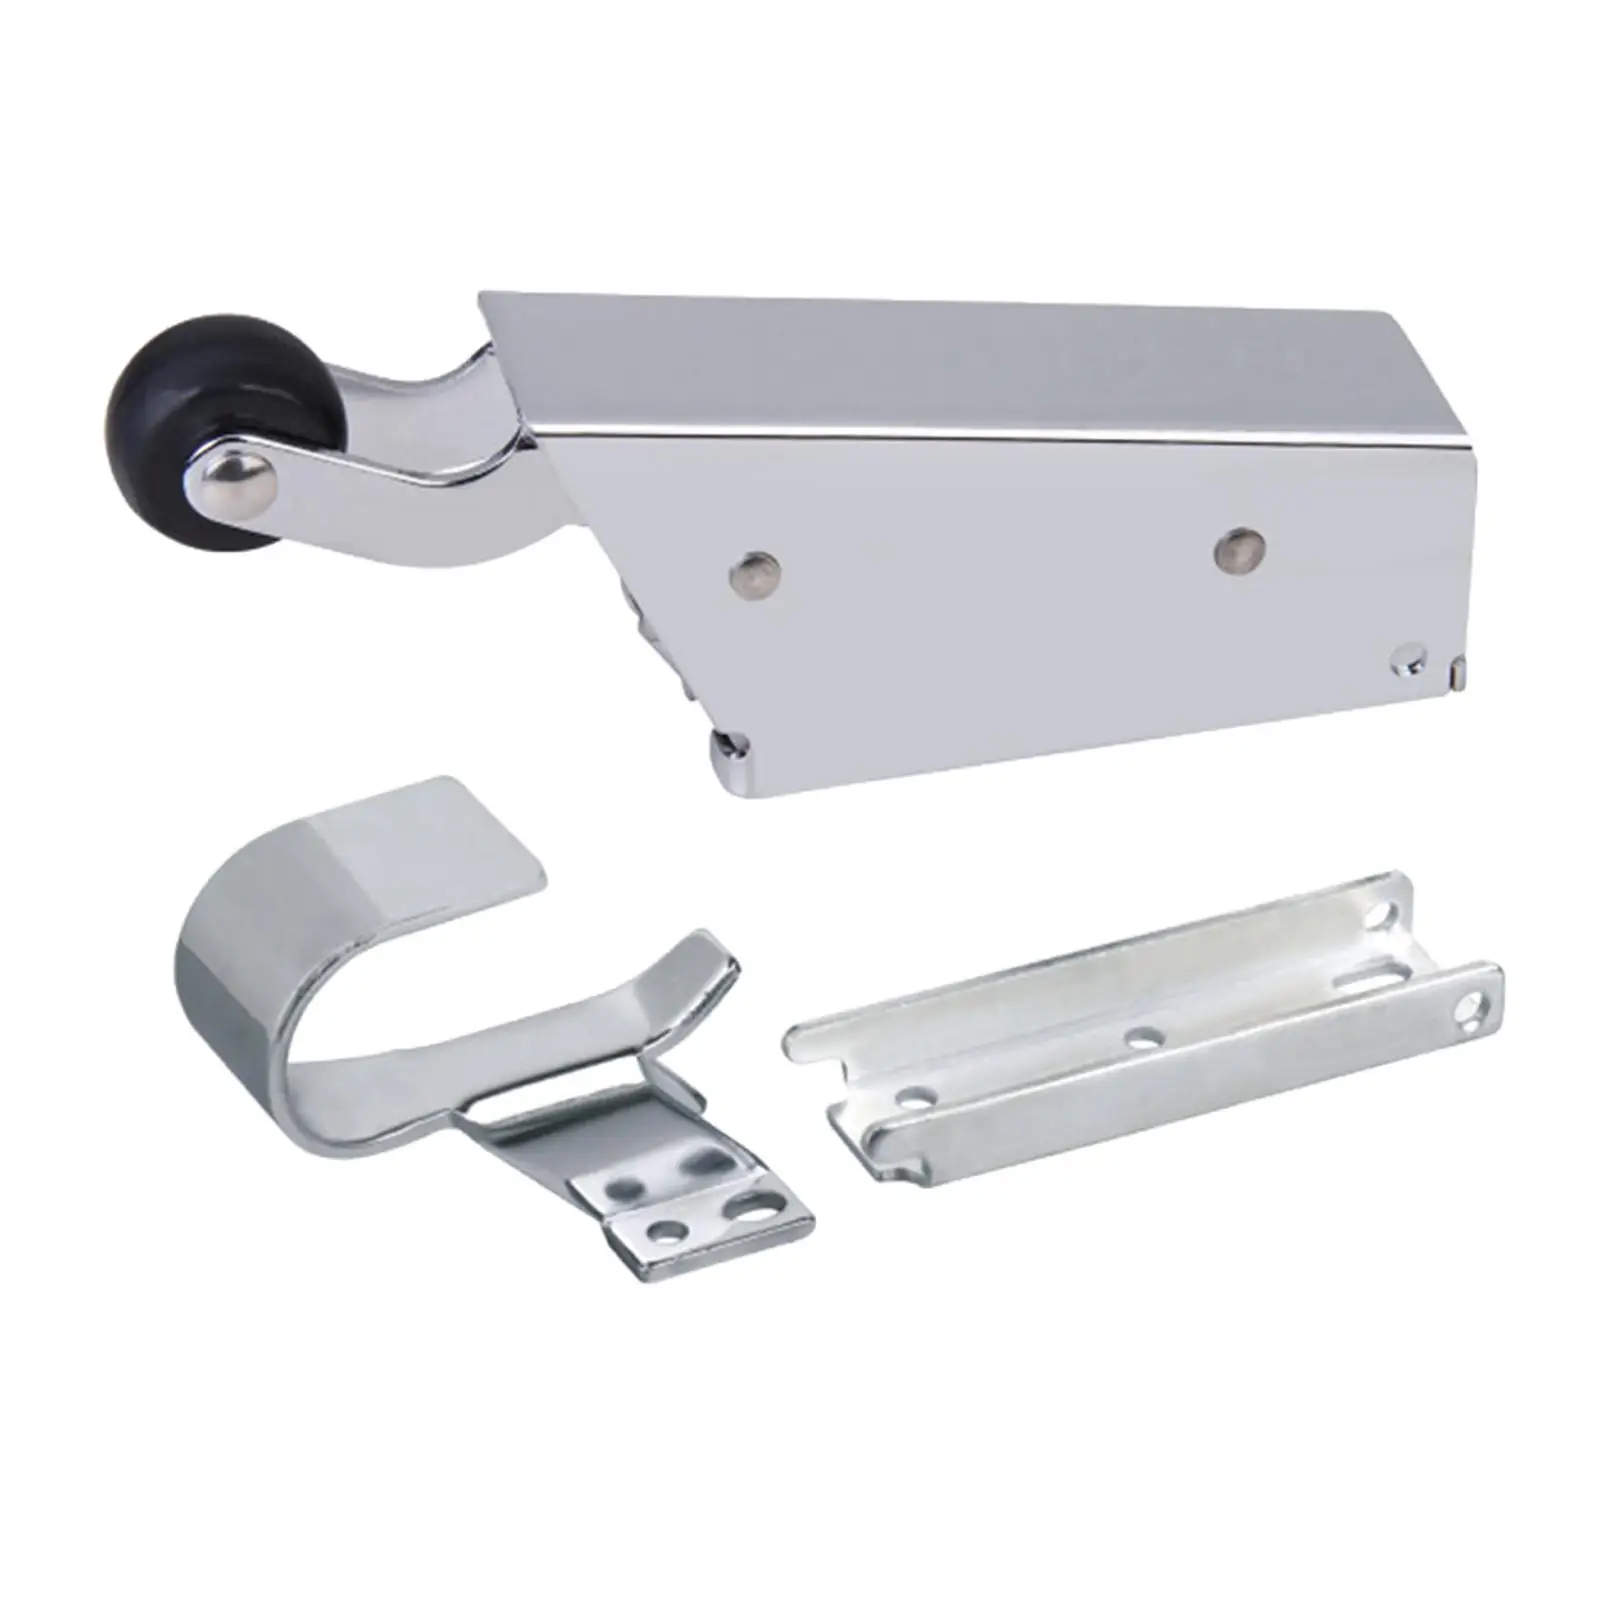 Spring Action Doors Closer Steel Automatic School Refrigeration Door Closers Spring Loaded with Quiet Rubber Wheel Hotel